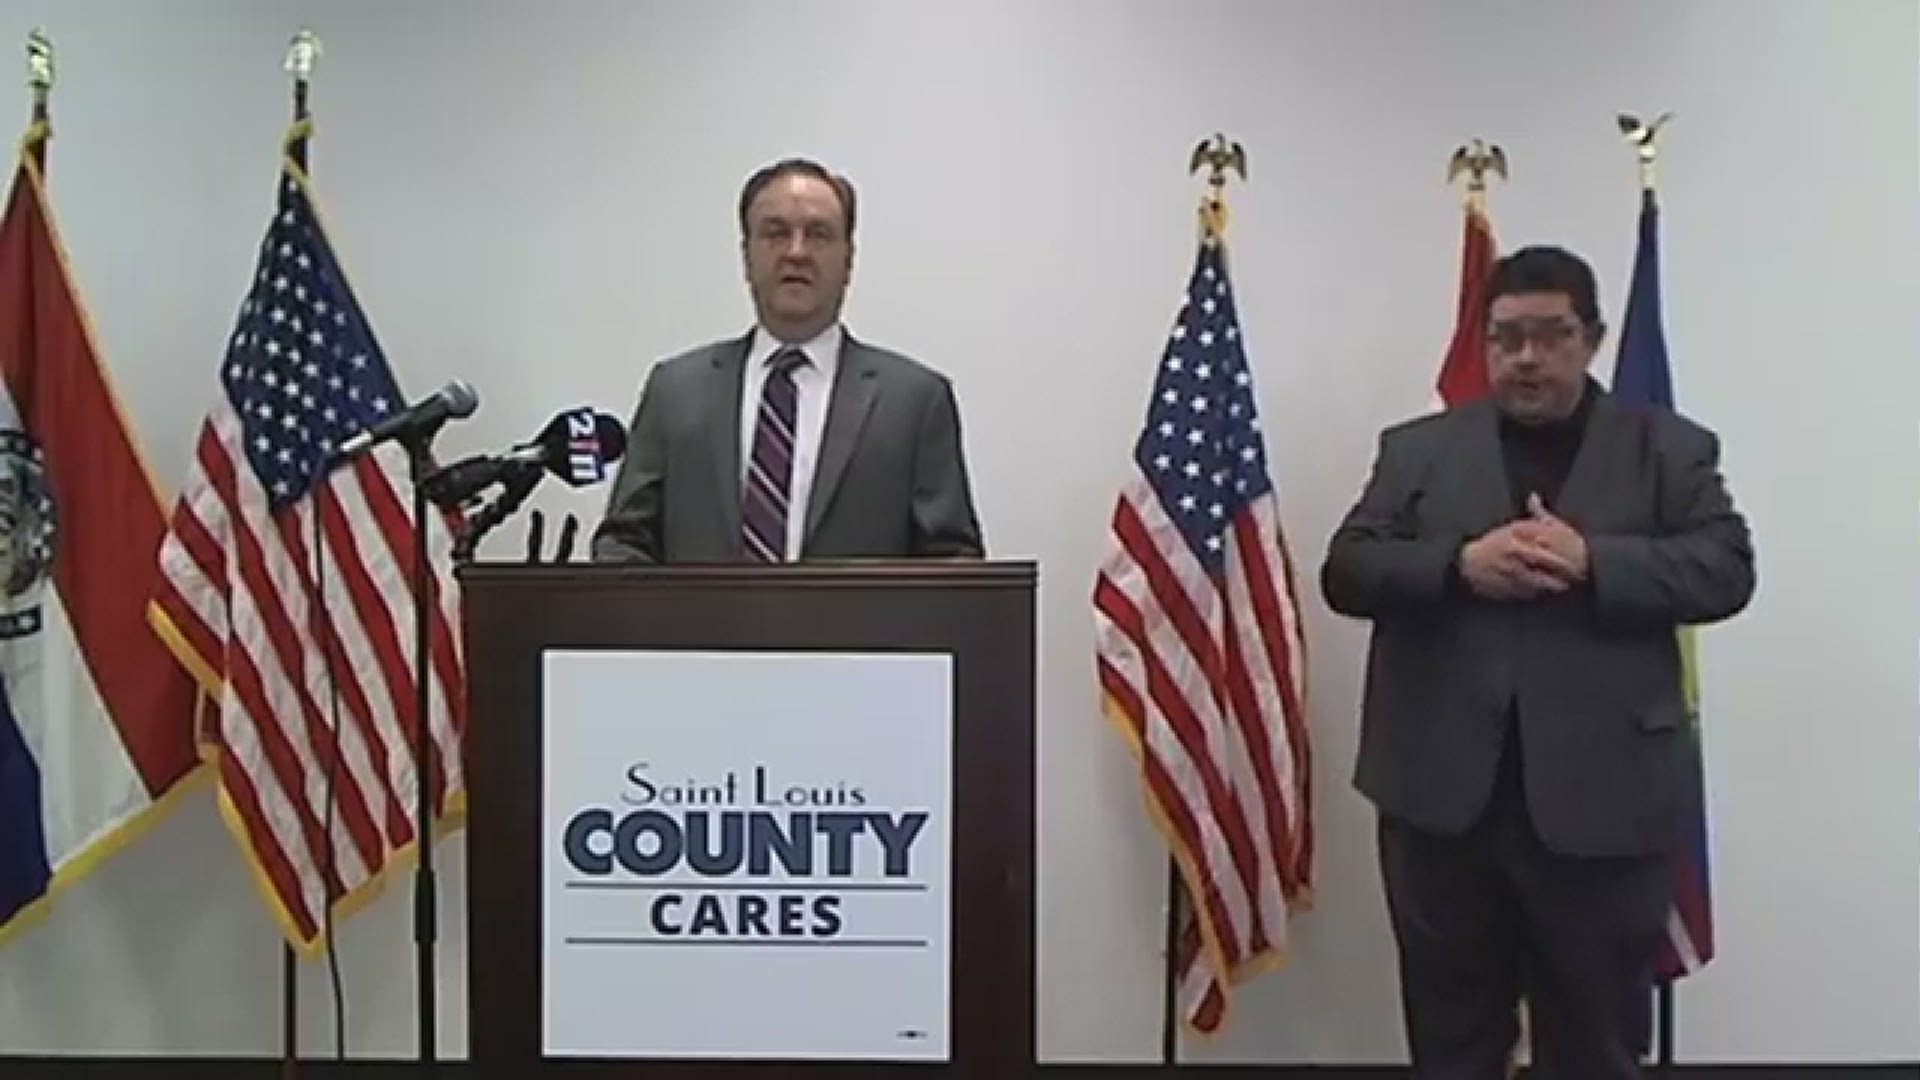 St. Louis County Executive Sam Page will hold a briefing at 8:30 a.m.